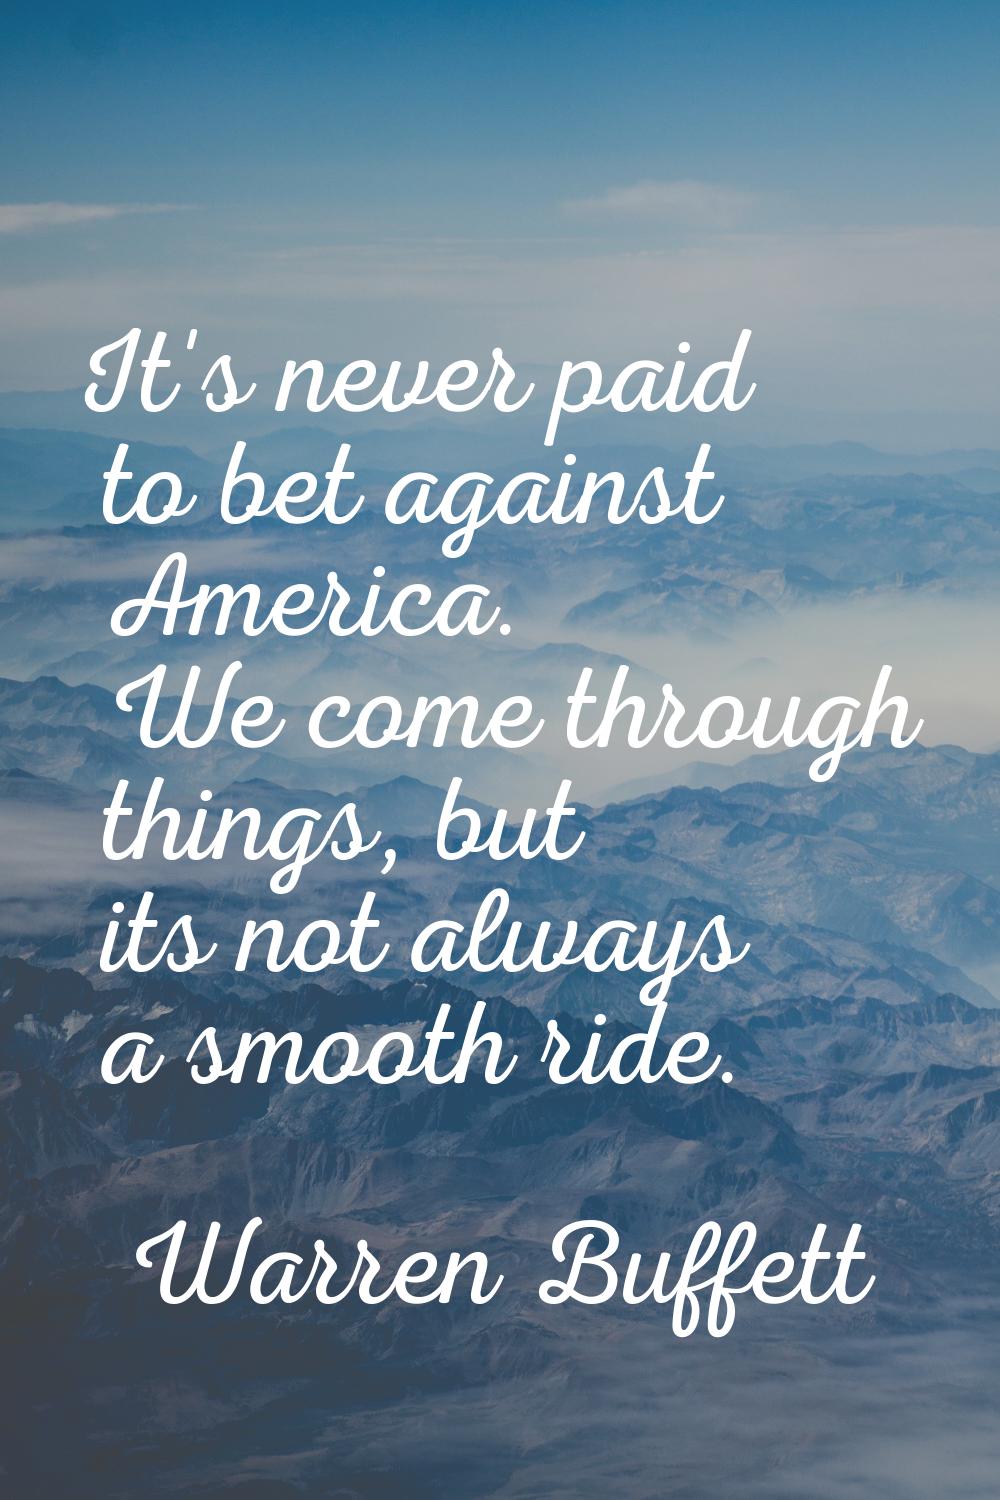 It's never paid to bet against America. We come through things, but its not always a smooth ride.